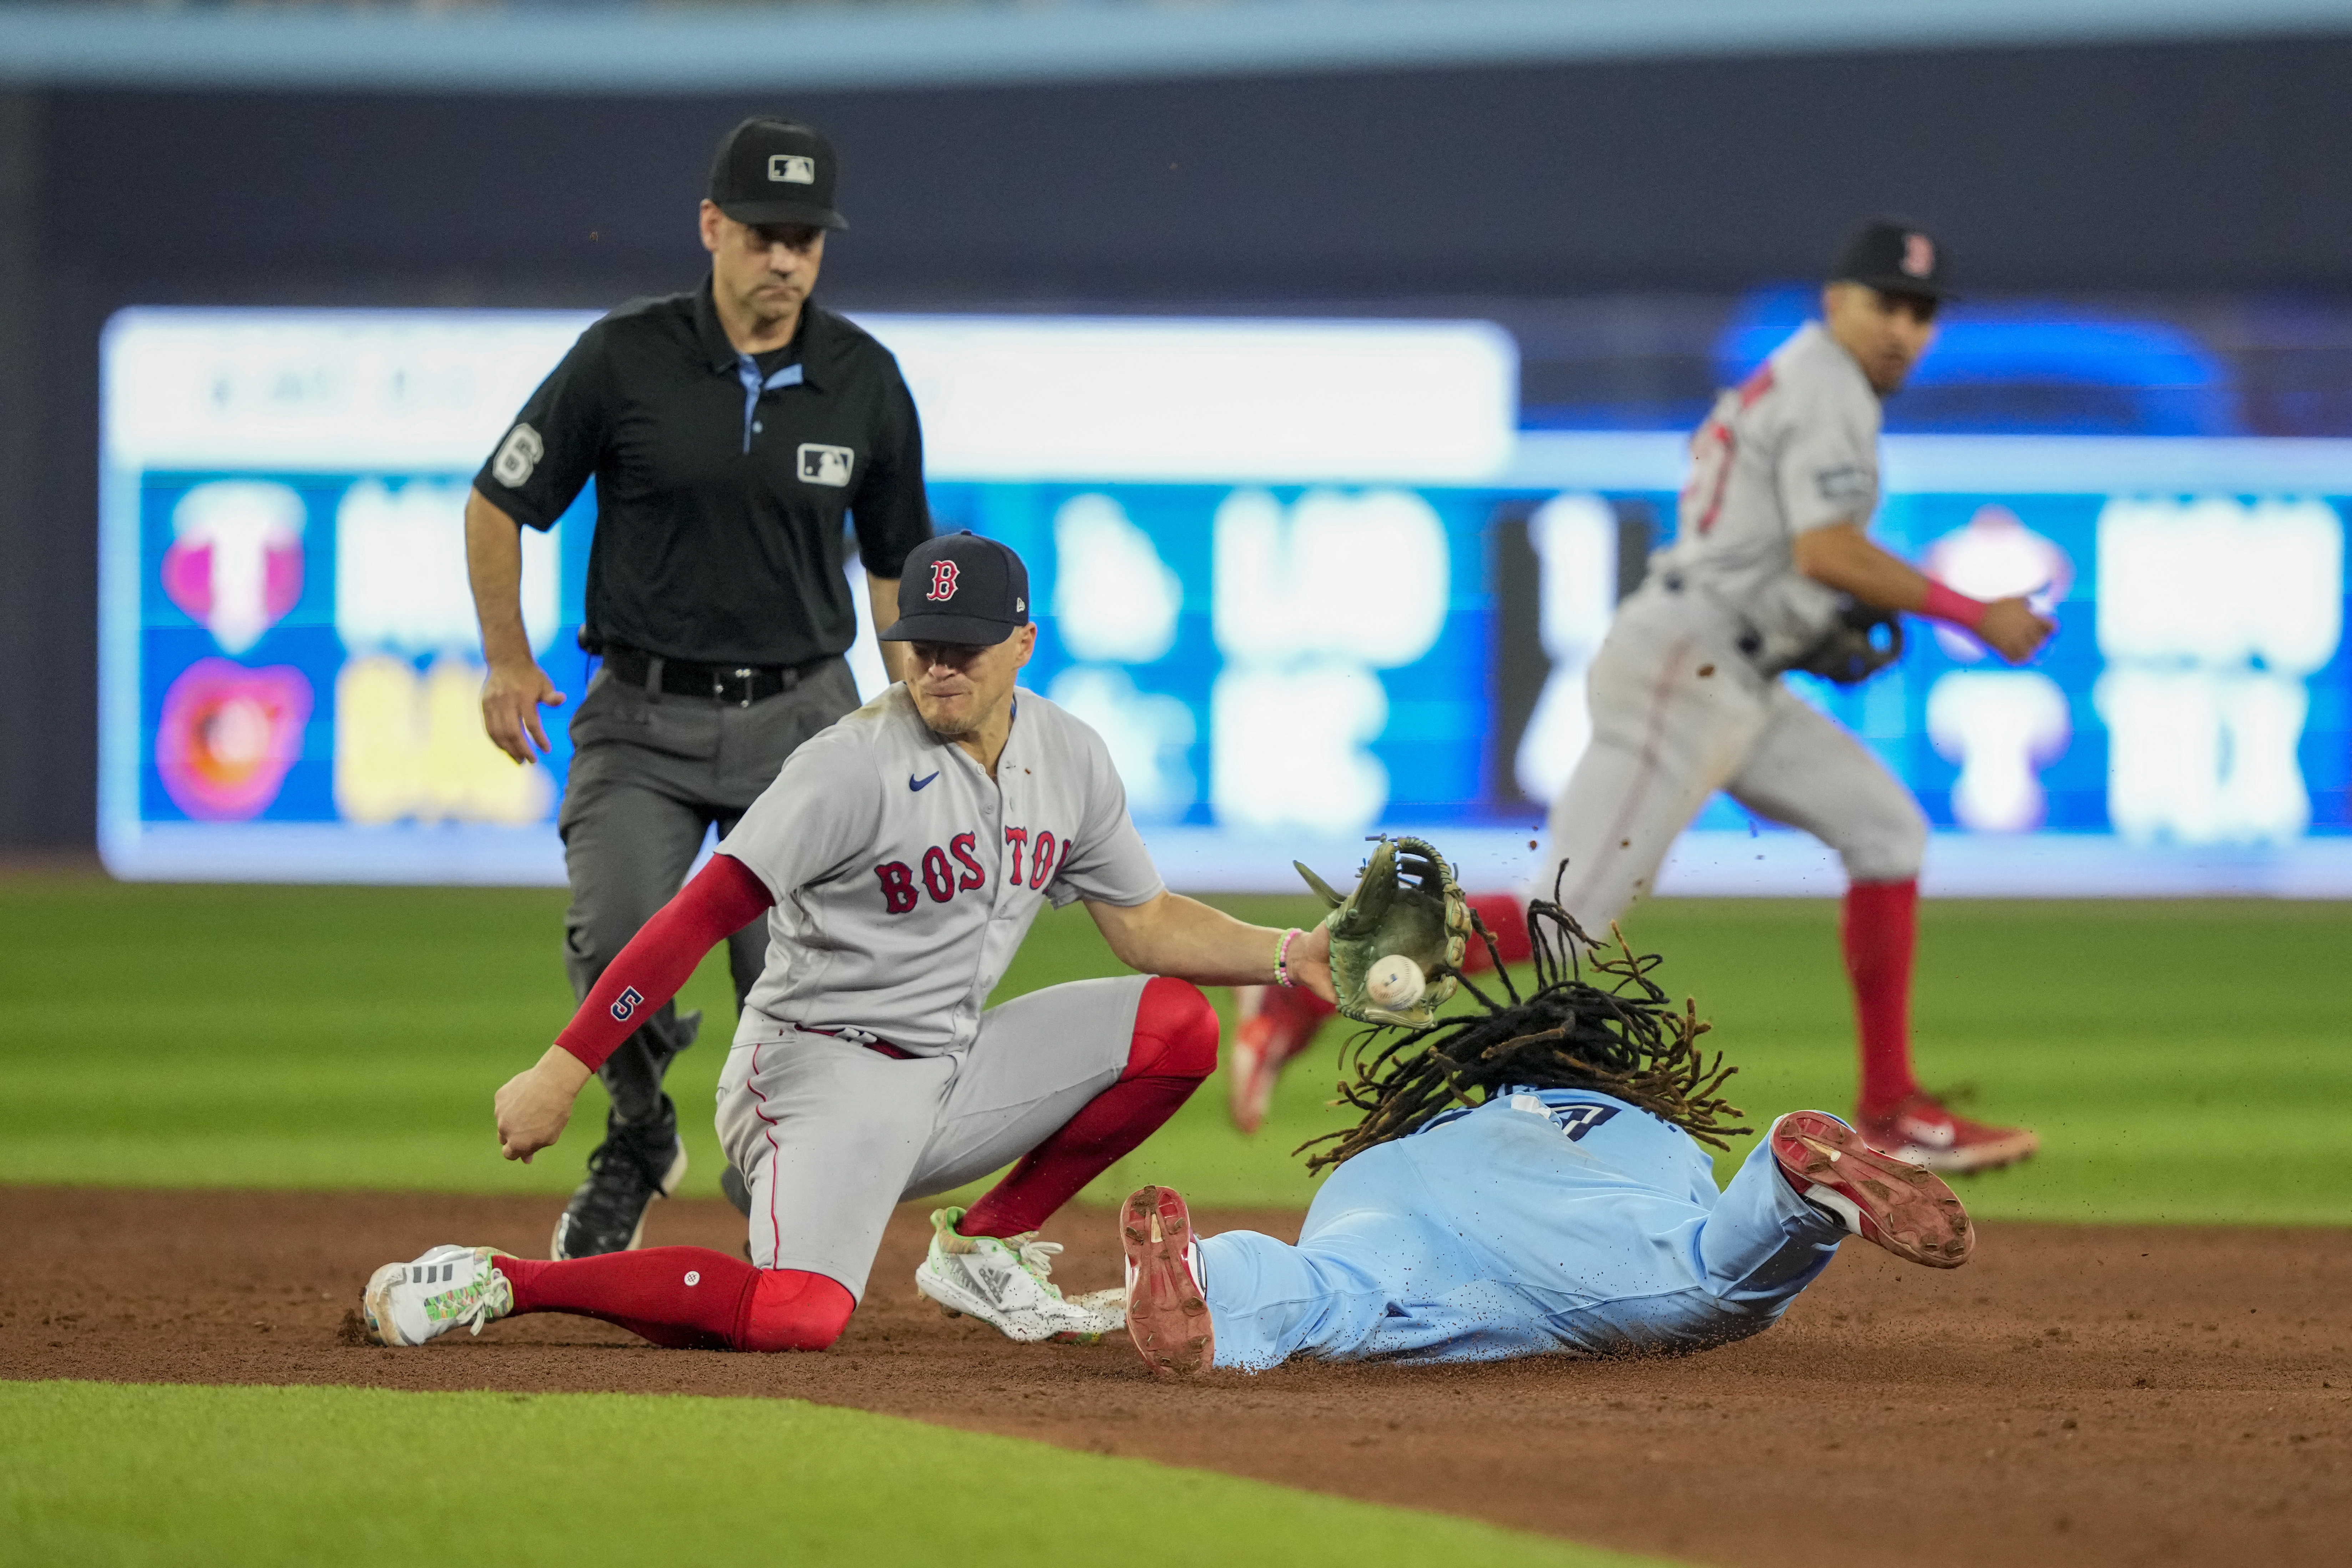 Red Sox complete 3-game sweep of Blue Jays behind Verdugo's 9th